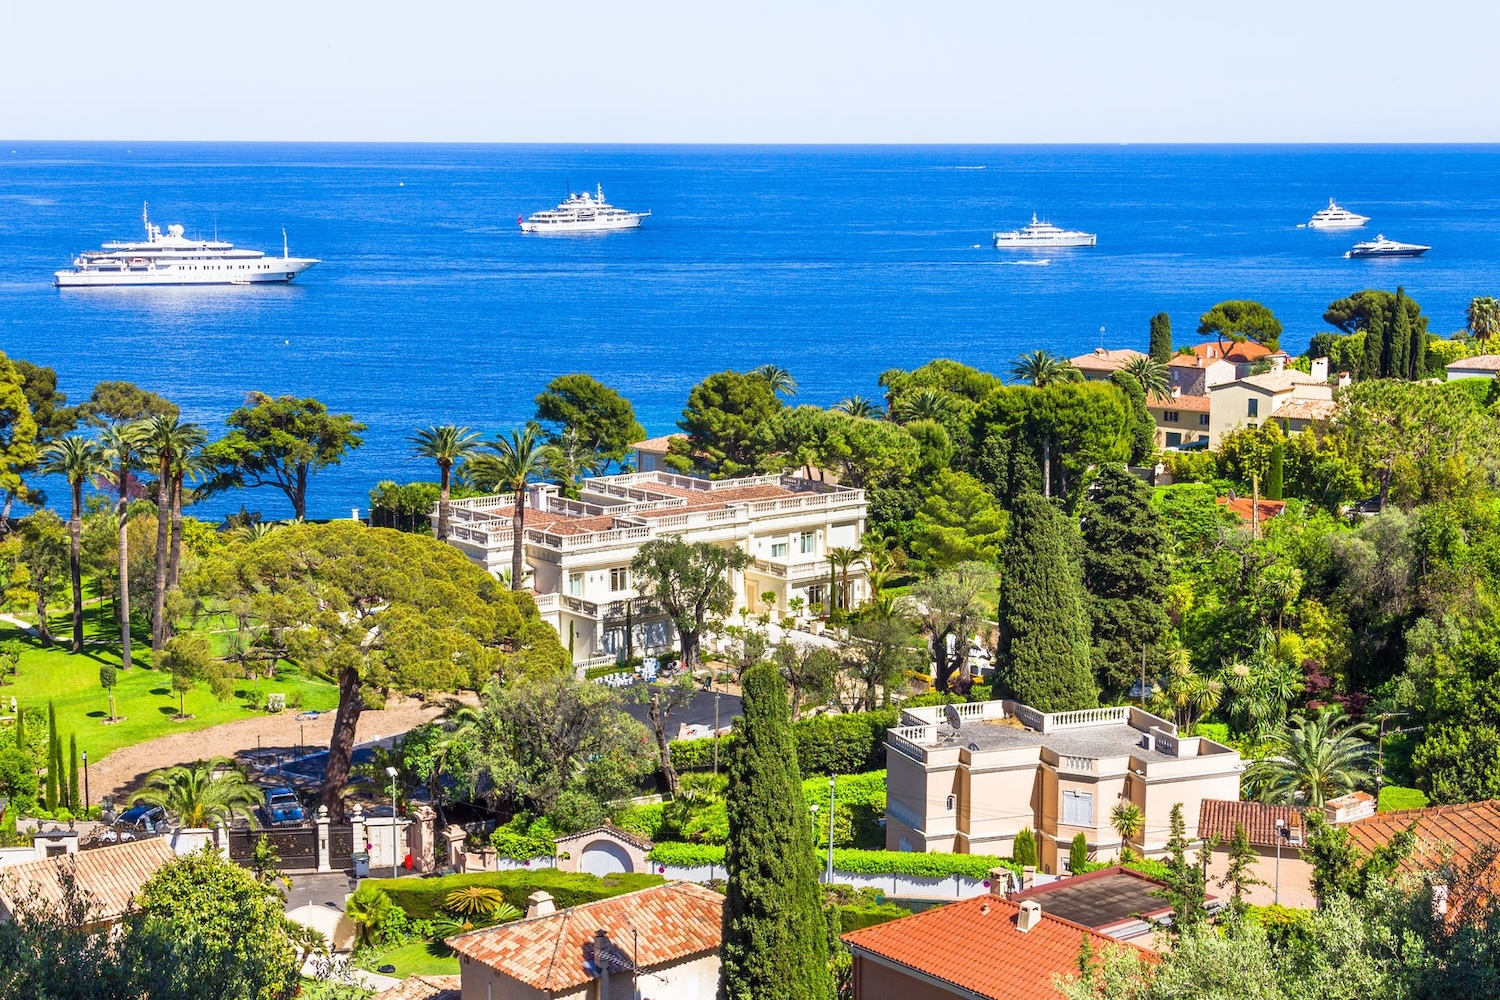 French Riviera Yacht Charter | Rent a Yacht on the Côte d'Azur